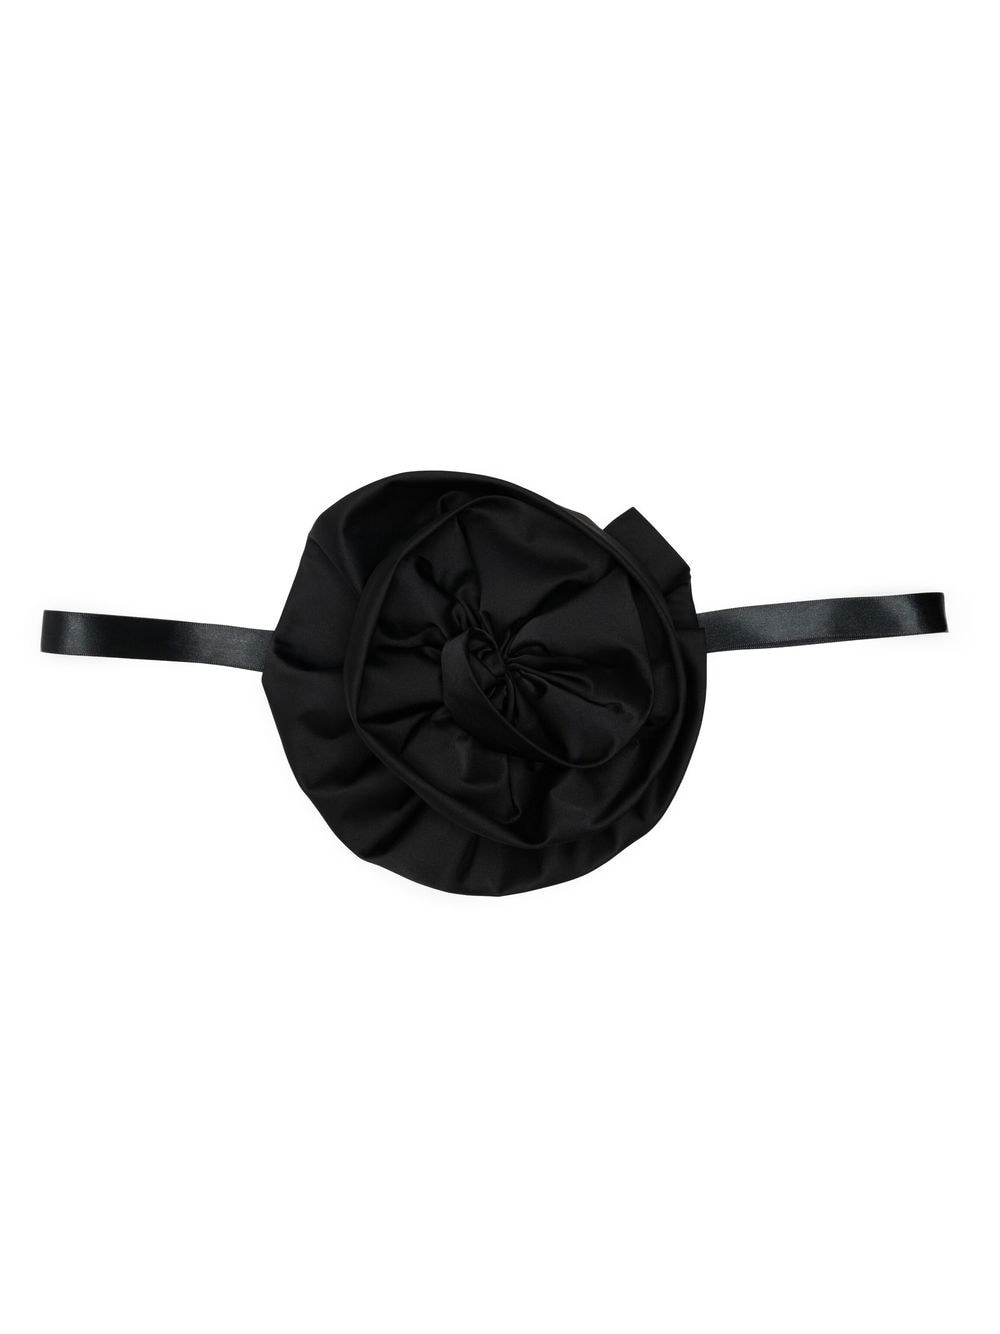 Lola Flower Choker Necklace - Chocolate Brown with Black Velvet